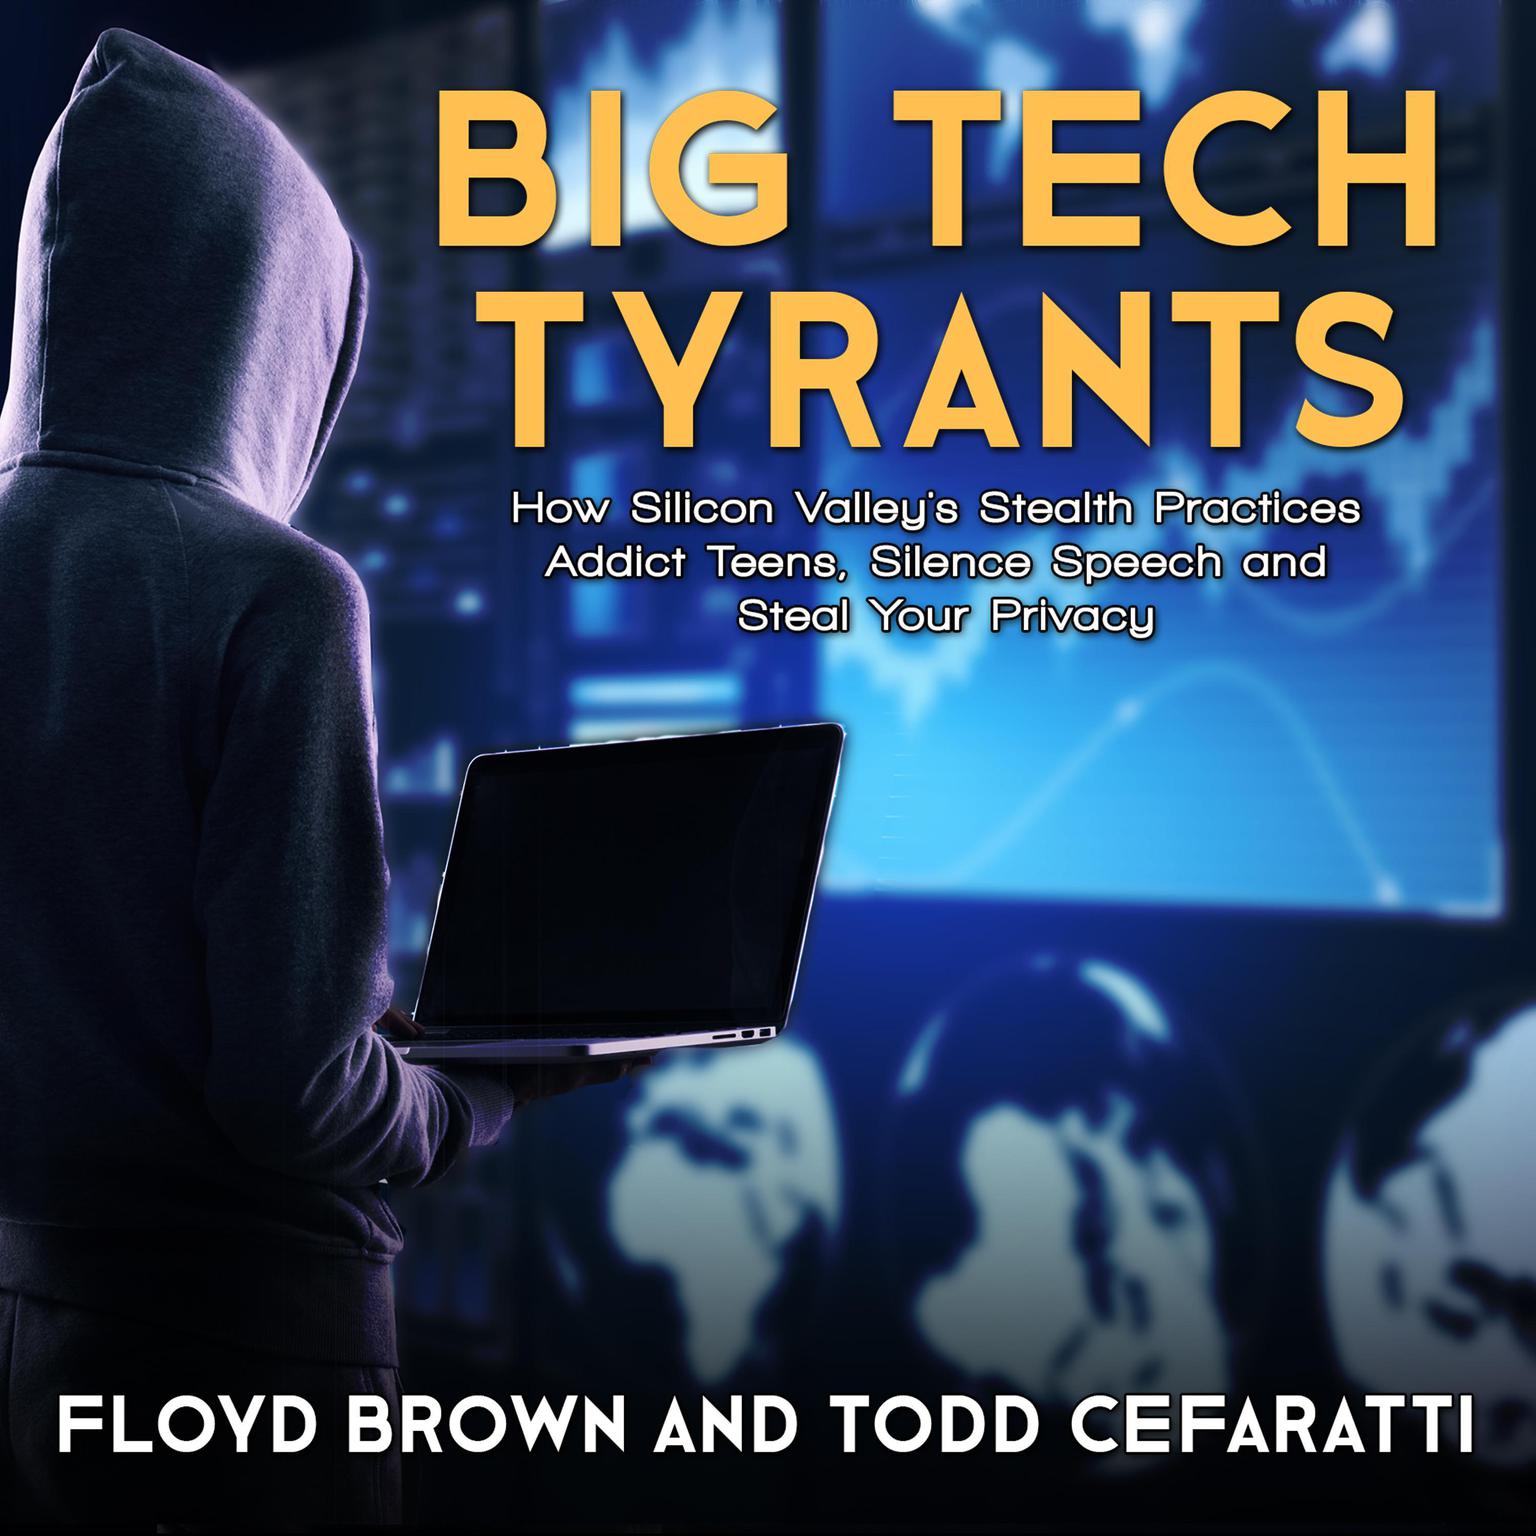 Big Tech Tyrants: How Silicon Valleys Stealth Practices Addict Teens, Silence Speech and Steal Your Privacy Audiobook, by Floyd Brown